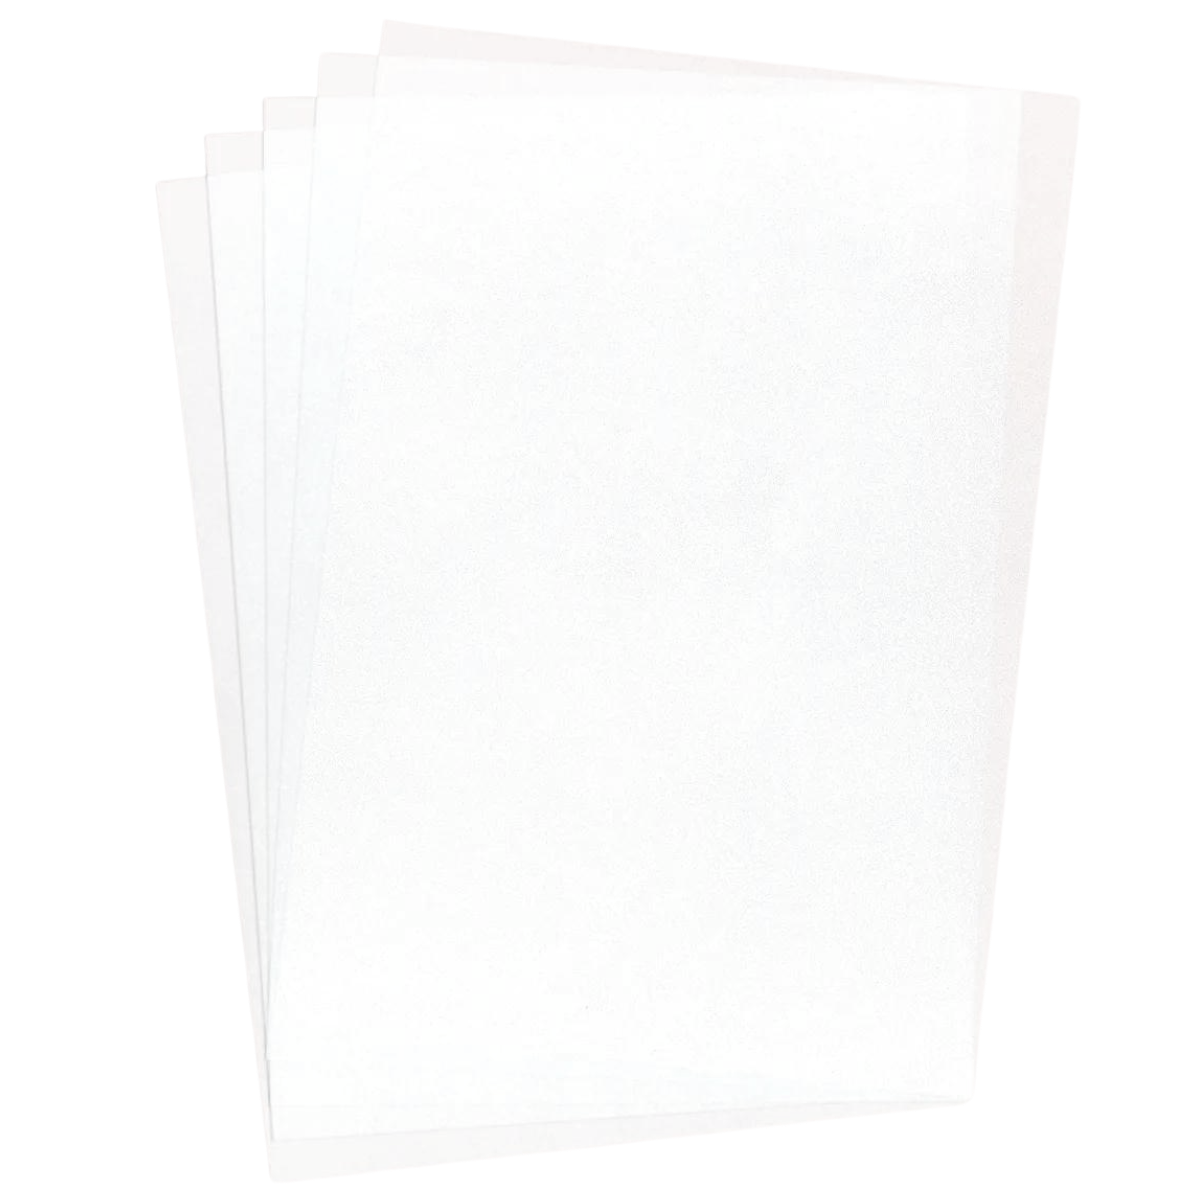 Bakery Crafts Edible Wafer Paper 8' x 11' - 100 sheets